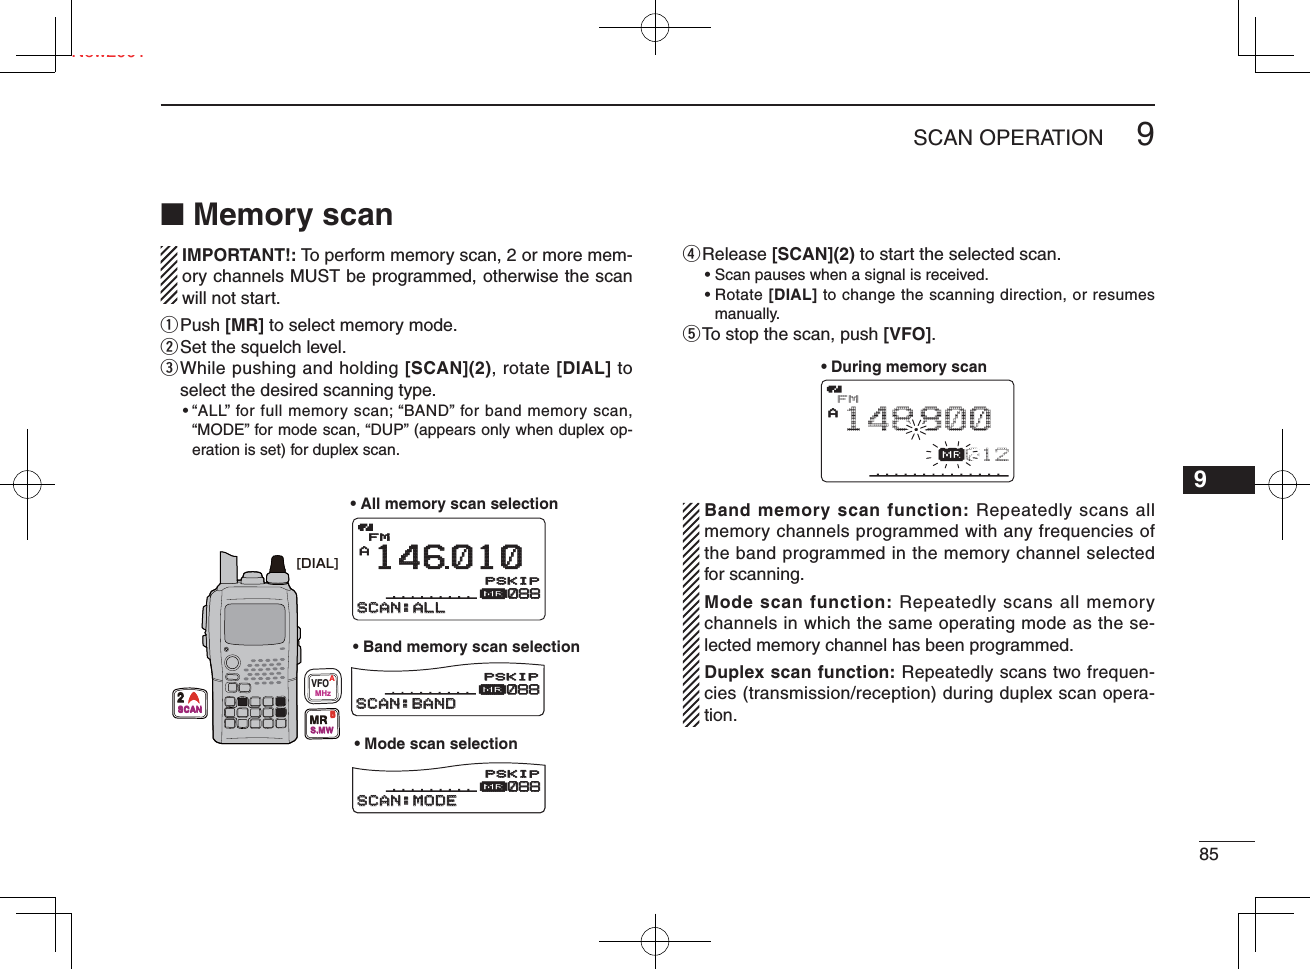 859SCAN OPERATIONNew200112345678910111213141516171819■ Memory scan   IMPORTANT!: To perform memory scan, 2 or more mem-ory channels MUST be programmed, otherwise the scan will not start.q  Push [MR] to select memory mode.w Set the squelch level.e  While pushing and holding [SCAN](2), rotate [DIAL] to select the desired scanning type.•  “ALL” for full memory scan; “BAND” for band memory scan,  “MODE” for mode scan, “DUP” (appears only when duplex op-eration is set) for duplex scan.r Release  [SCAN](2) to start the selected scan.• Scan pauses when a signal is received.•  Rotate [DIAL] to change the scanning direction, or resumes manually.t To stop the scan, push [VFO].  Band memory scan function: Repeatedly scans all memory channels programmed with any frequencies of the band programmed in the memory channel selected for scanning.  Mode scan function: Repeatedly scans all memory channels in which the same operating mode as the se-lected memory channel has been programmed.  Duplex scan function: Repeatedly scans two frequen-cies (transmission/reception) during duplex scan opera-tion.FMA146010μ088088SCAN:ALLSCAN:ALLFMA148 800μ088088SCAN:BANDSCAN:BANDFMA148 800μ088088SCAN:MODESCAN:MODEPSKIPSKIPPSKIPSKIPPSKIPSKIP• All memory scan selection• Mode scan selection• Band memory scan selection[DIAL]VFOMHzAMRS.MWB2SCANFMAμ012148800• During memory scan